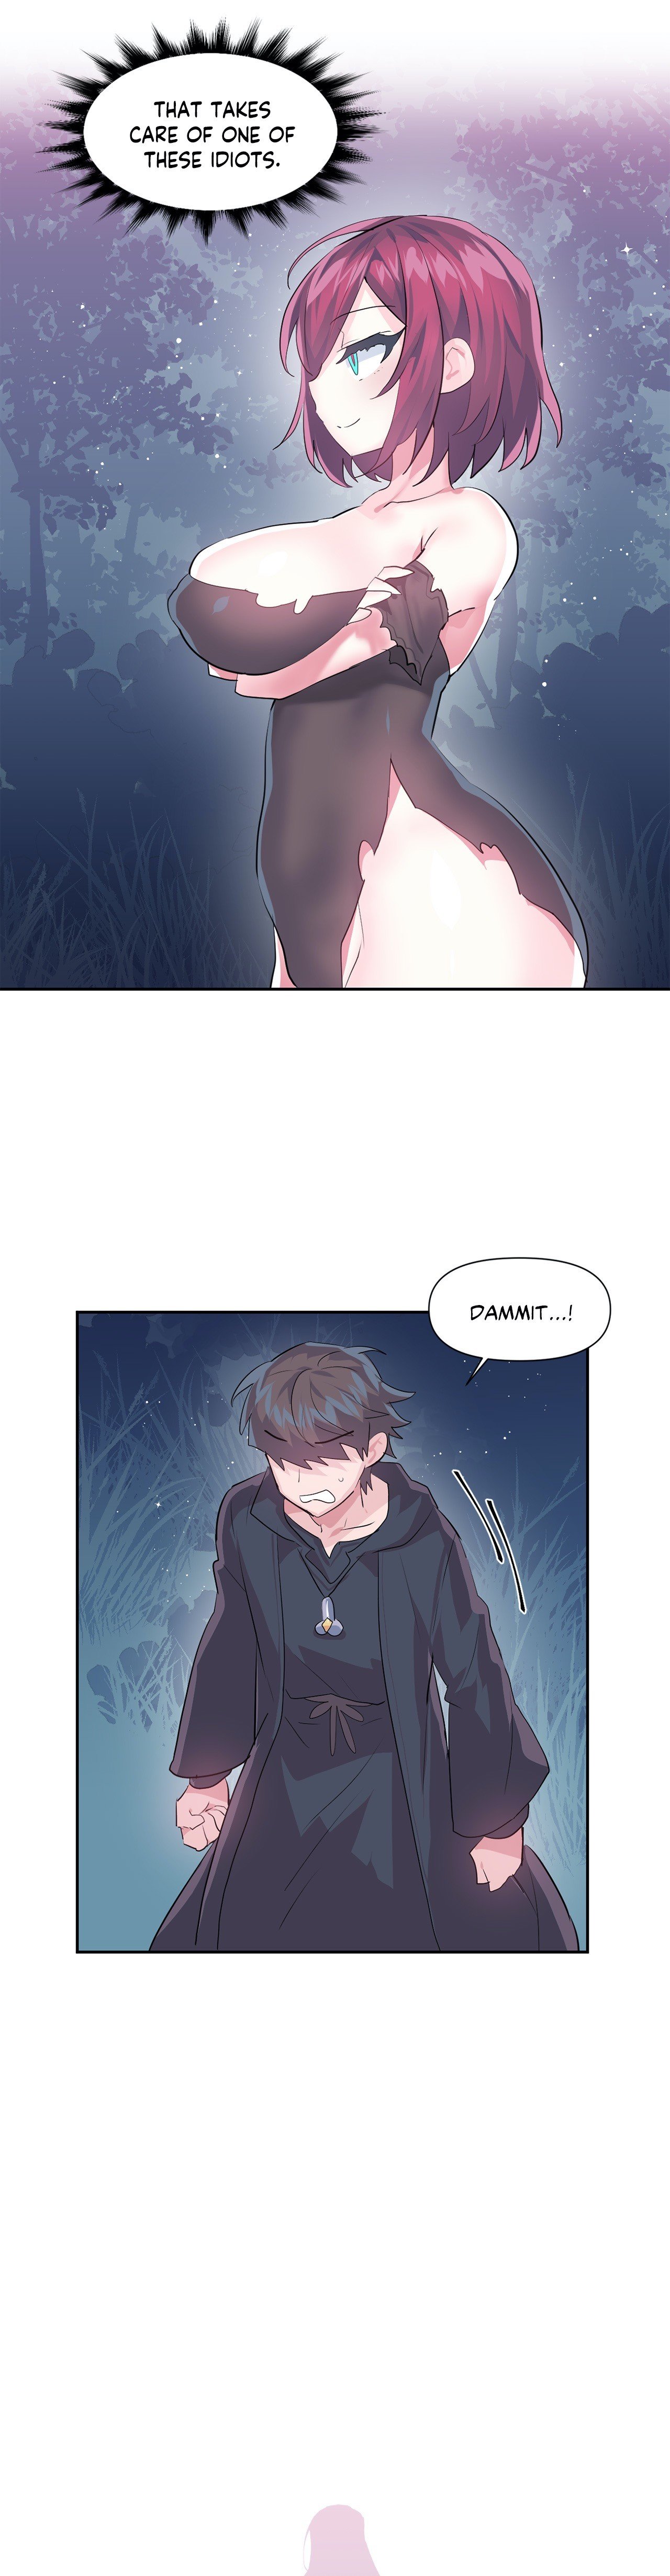 log-in-to-lust-a-land-chap-38-4